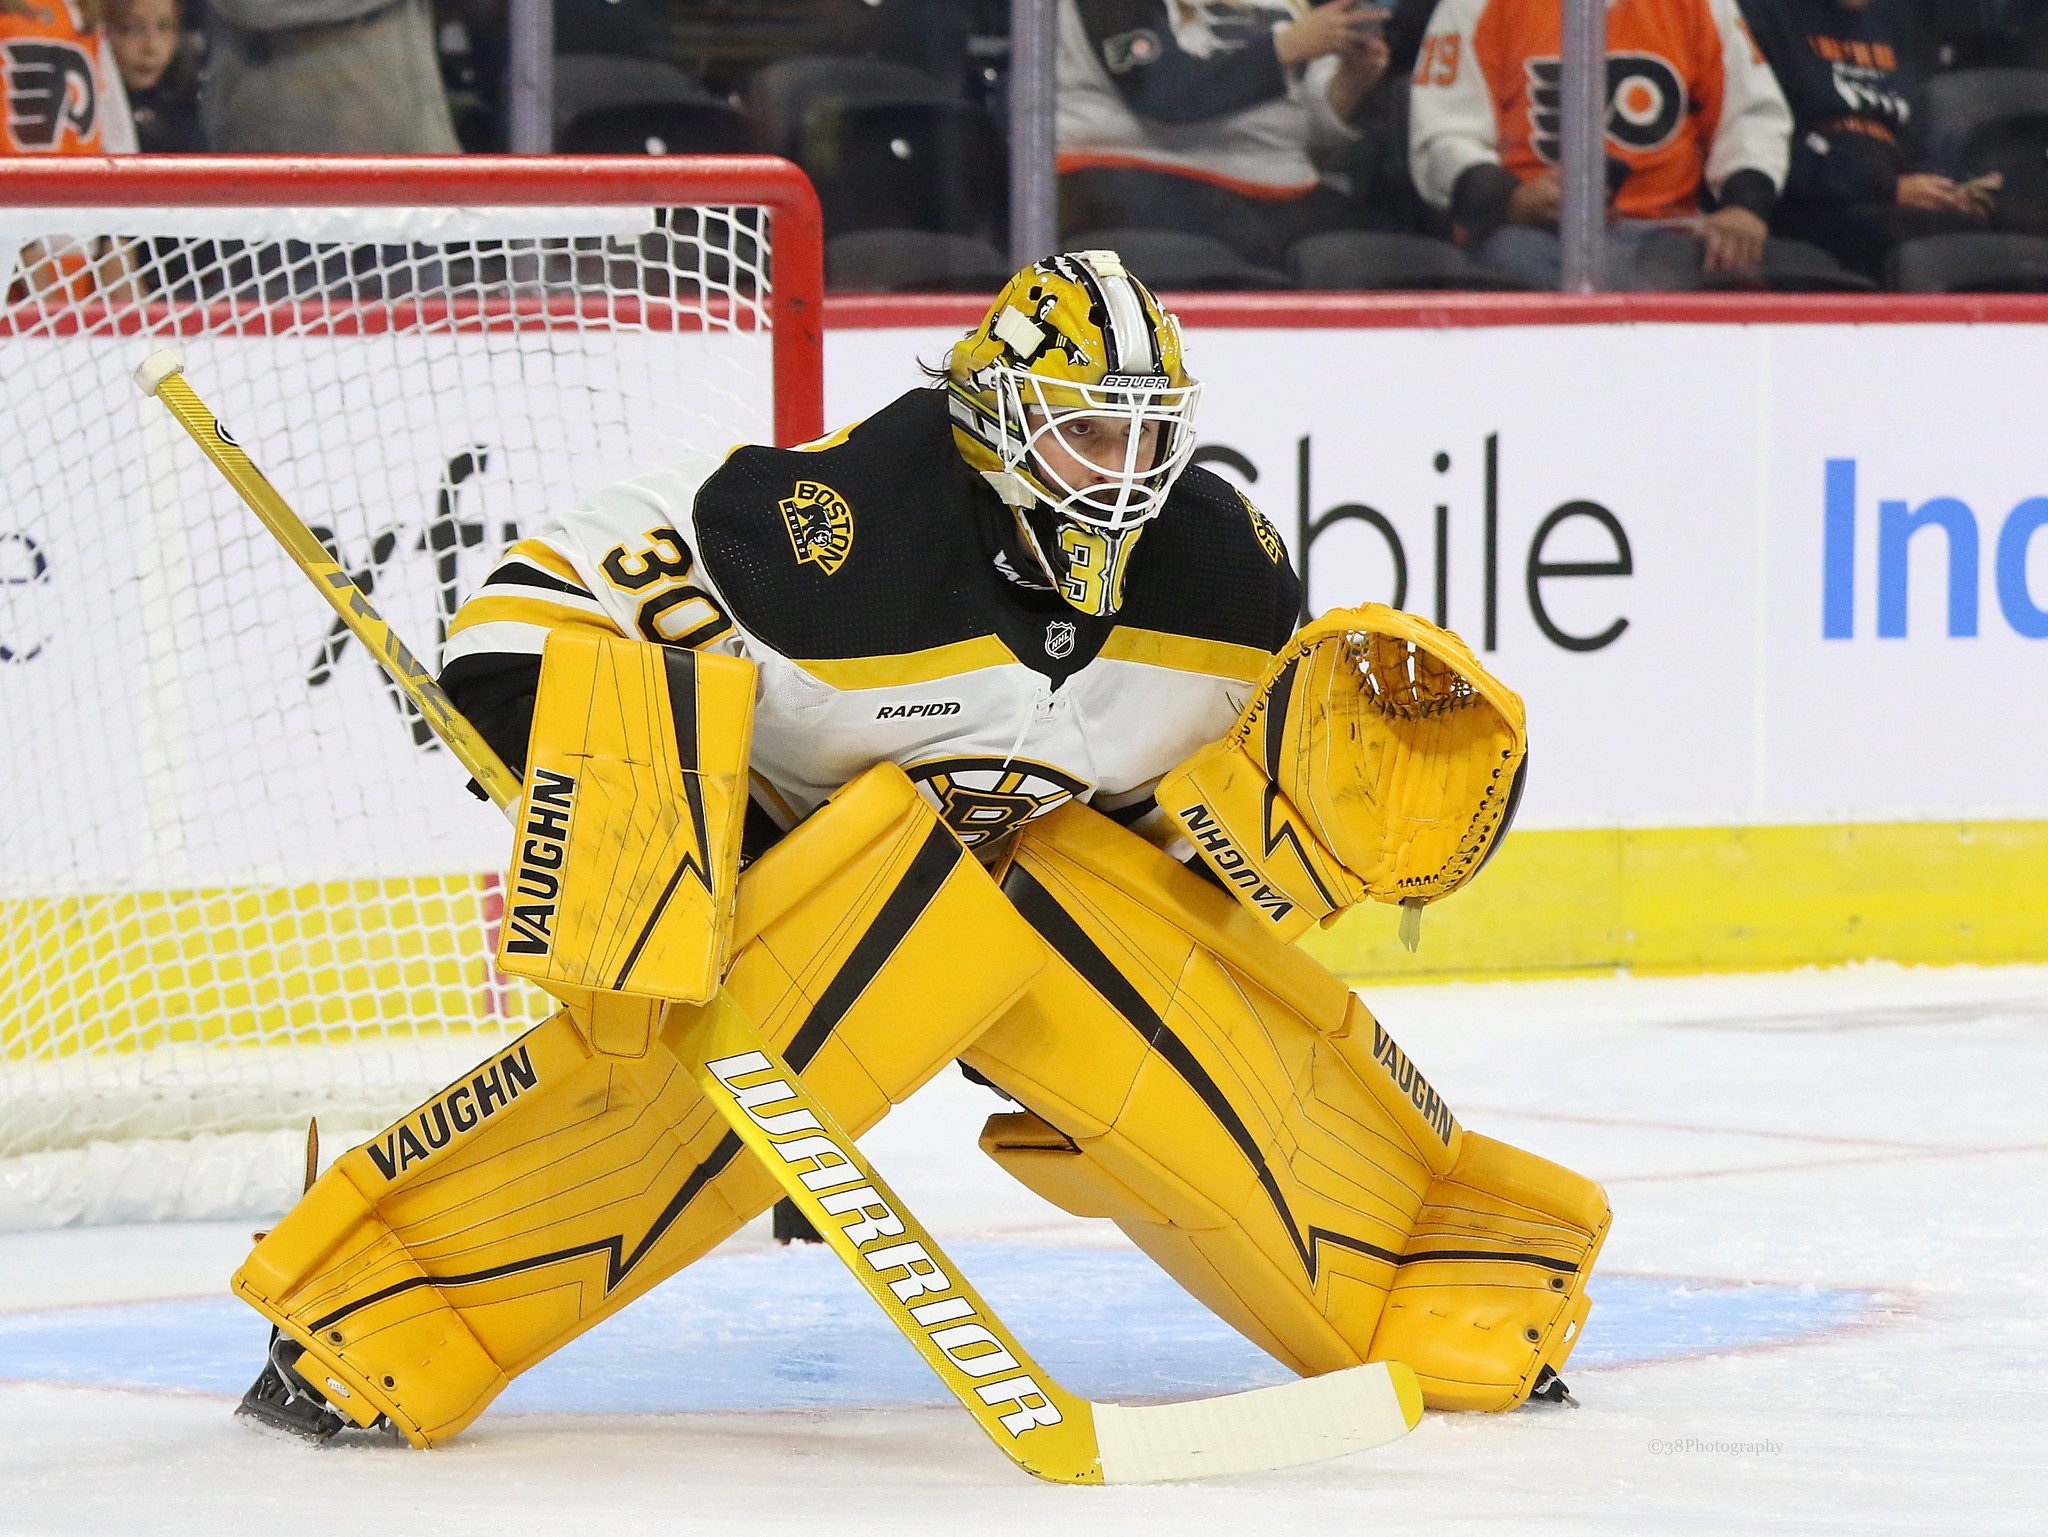 Keith Kinkaid makes Avs debut in yellow Bruins pads during Stars' rout